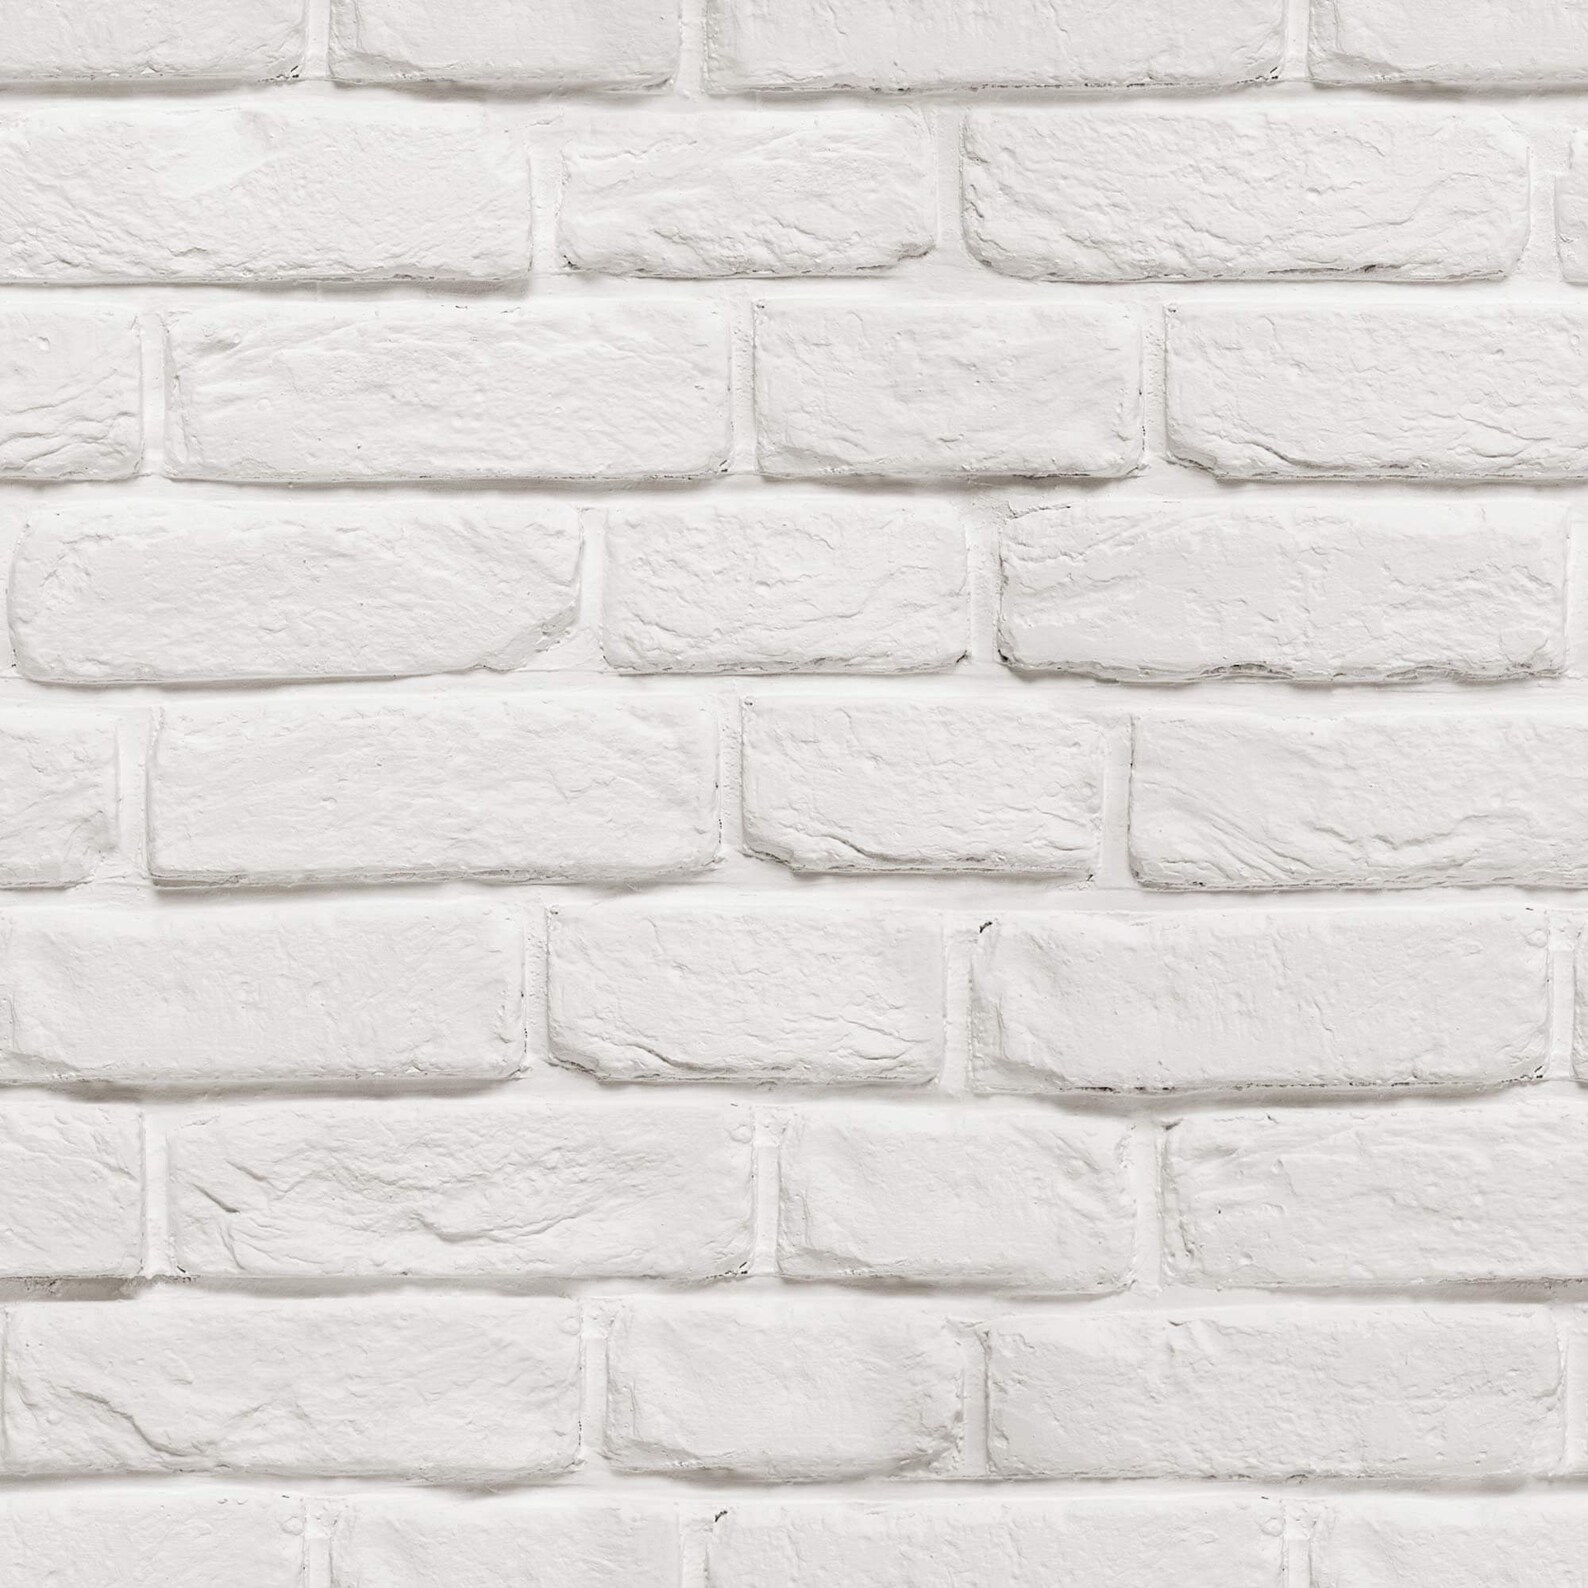 Black and White Brick Peel and Stick Removable Wallpaper 5429 - Etsy